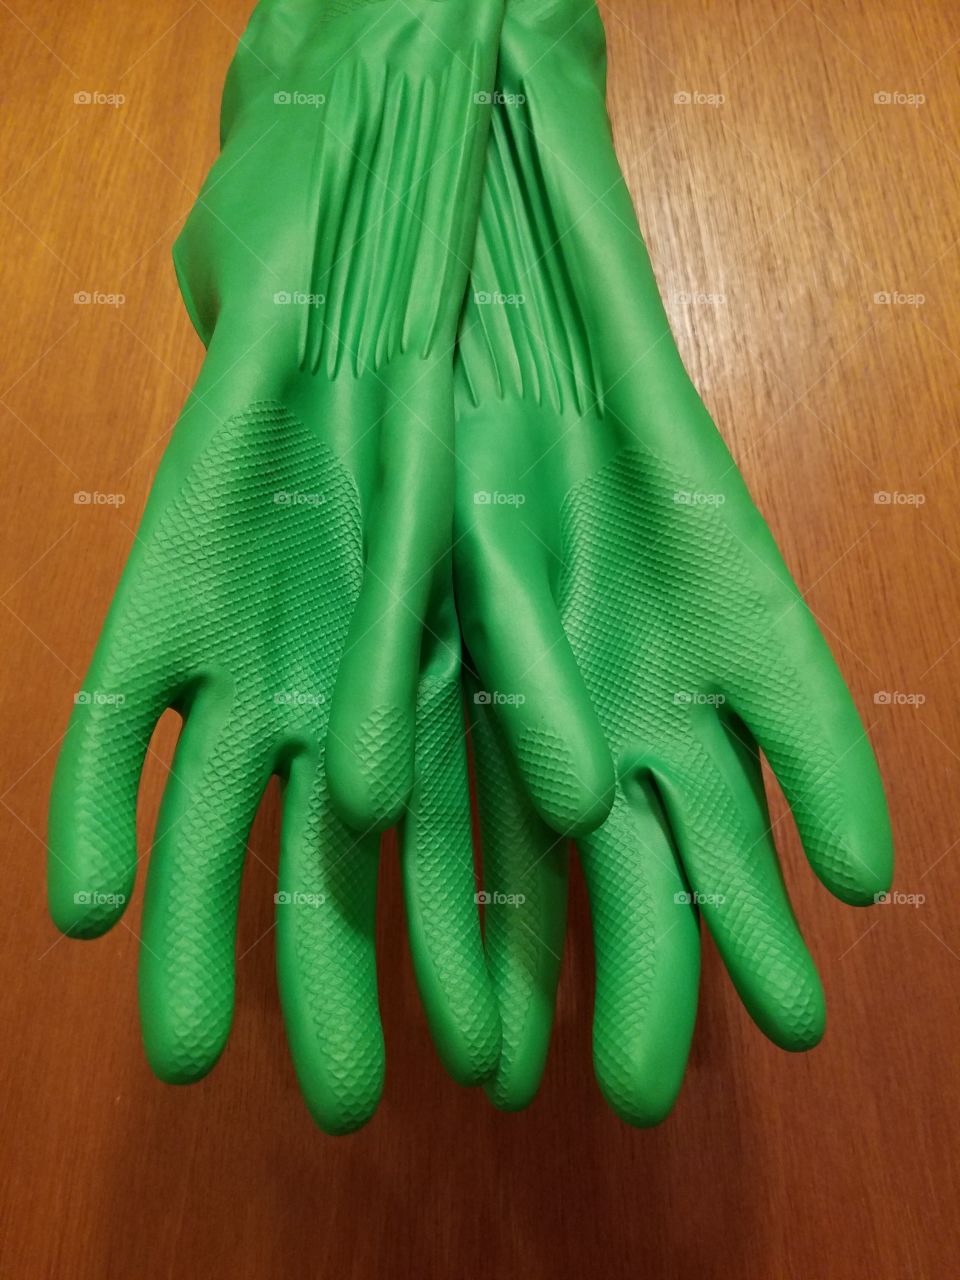 Green Rubber Gloves for cleaning!